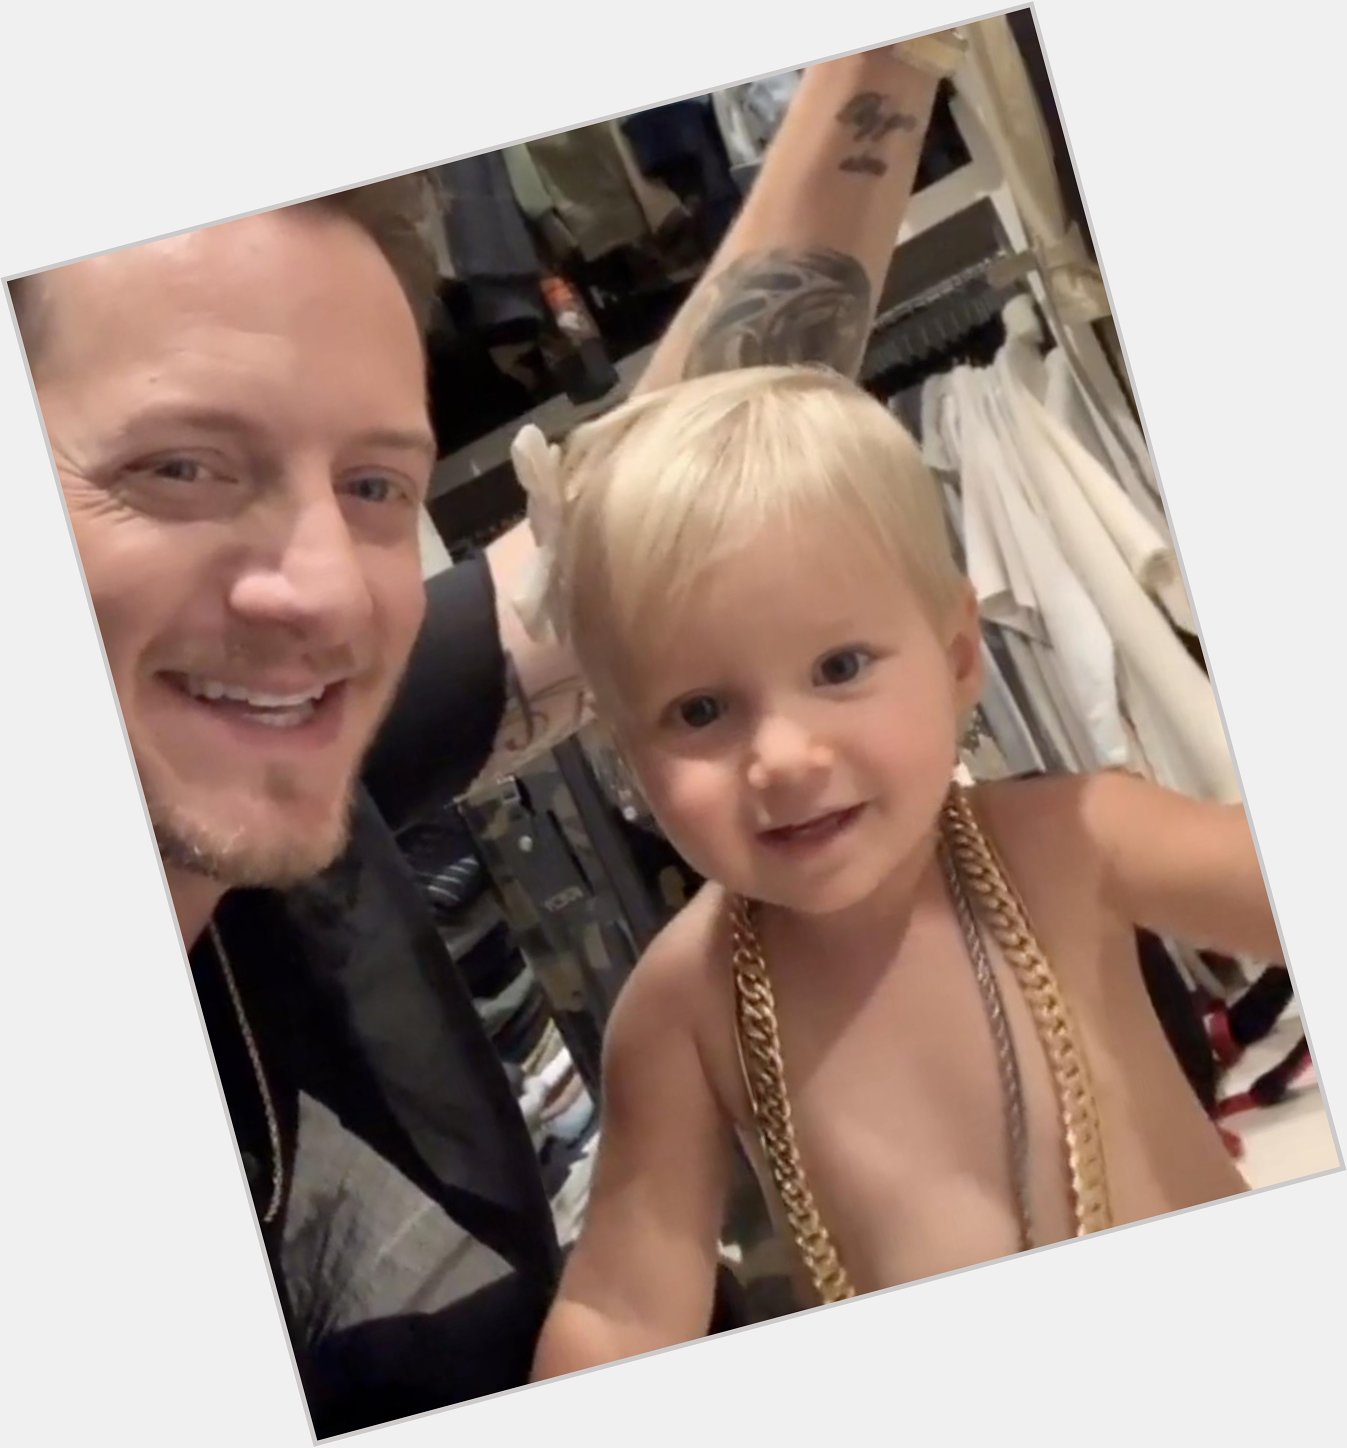 FGL\s Tyler Hubbard Recruits Toddler To Wish Brian Kelley A Happy Birthday (VIDEO)  